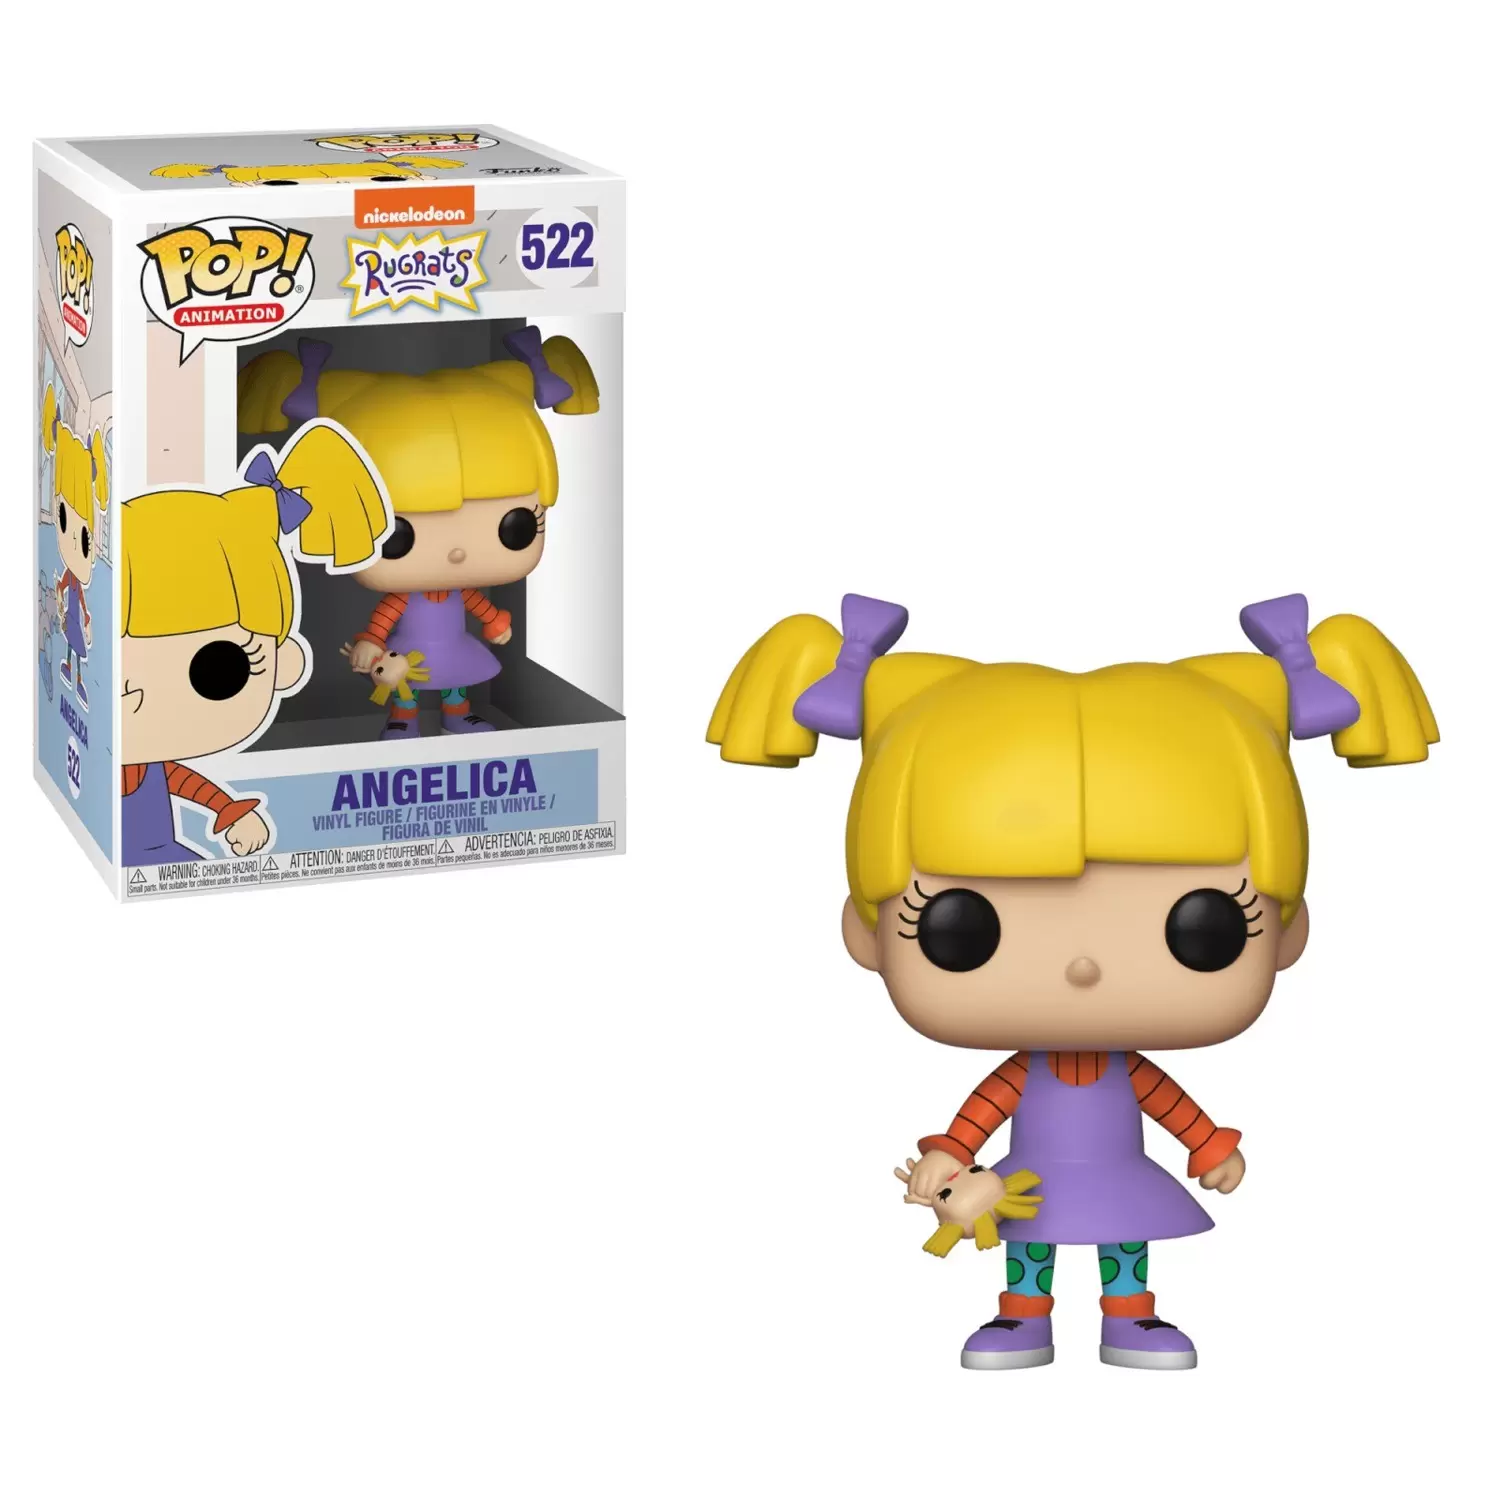 POP! Animation - Rugrats - Angelica